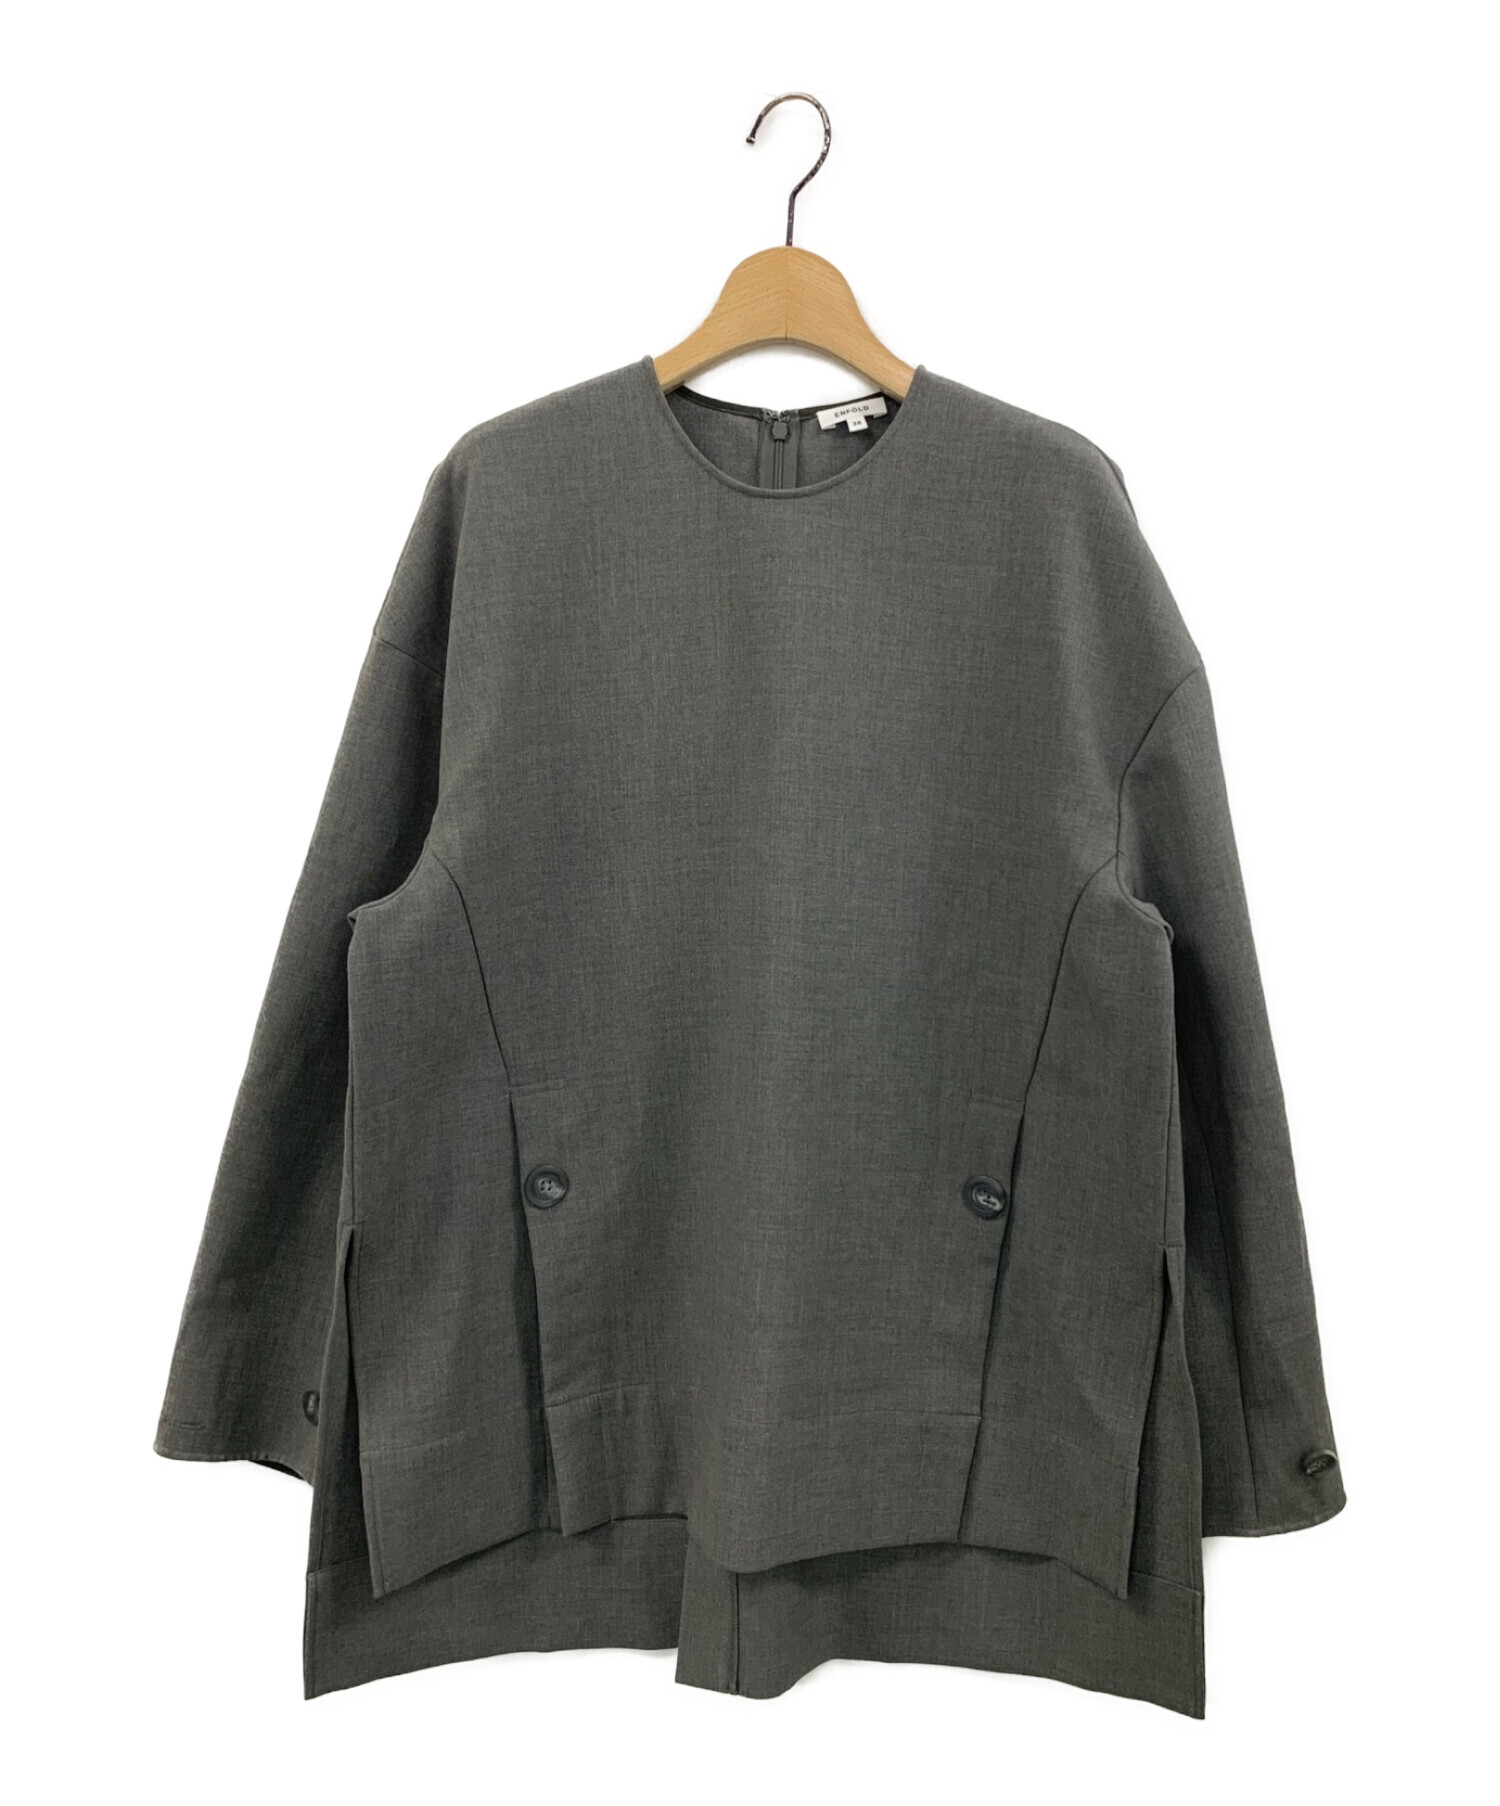 【ENFOLD】TWO-WAY-SLEEVE PULLOVER＊カラーブラック